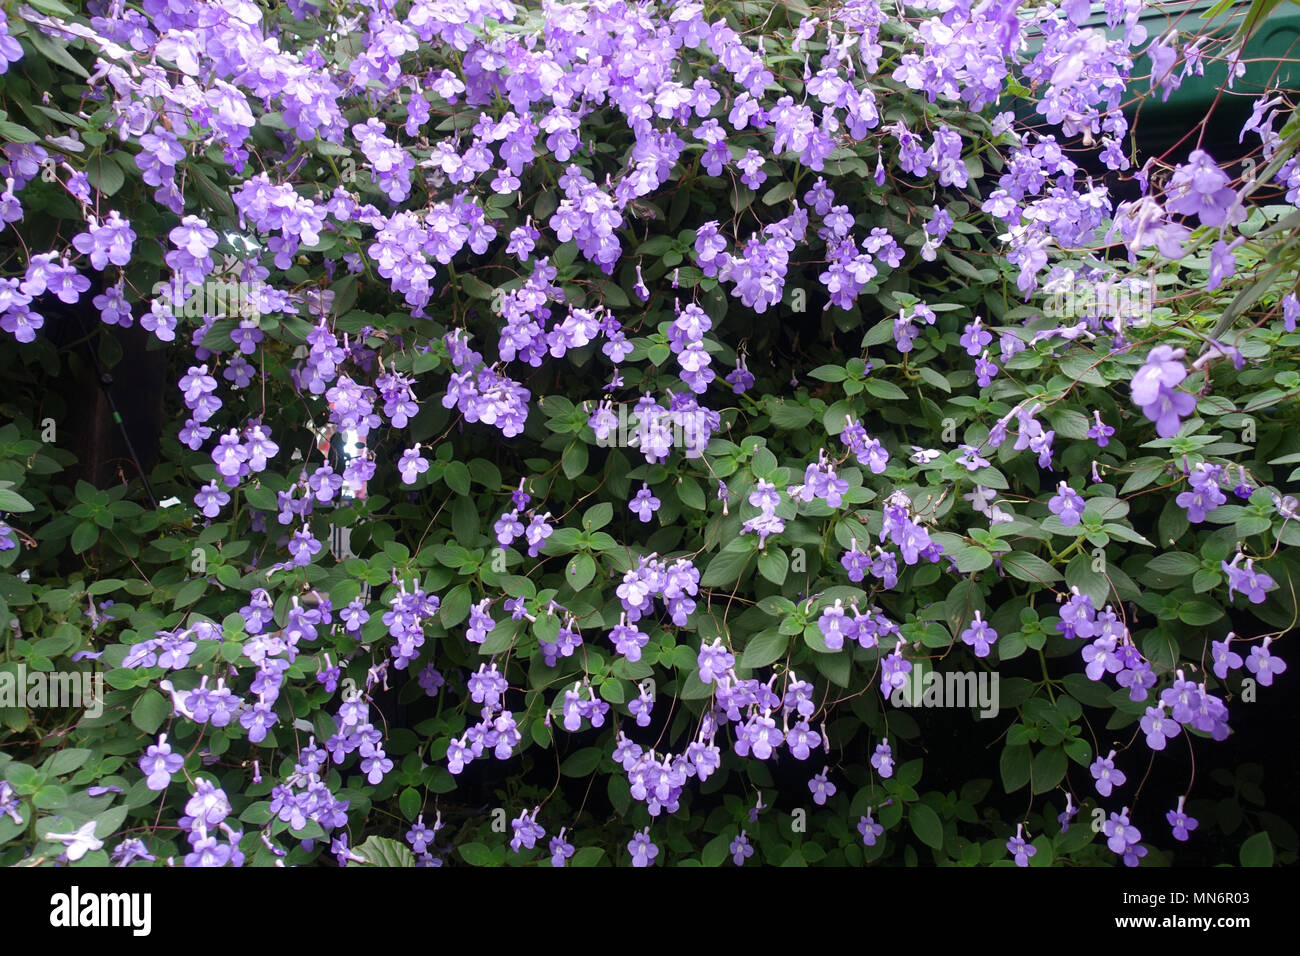 Streptocarpus caulescens or known as The Nodding Violets plant with blooming flowers Stock Photo